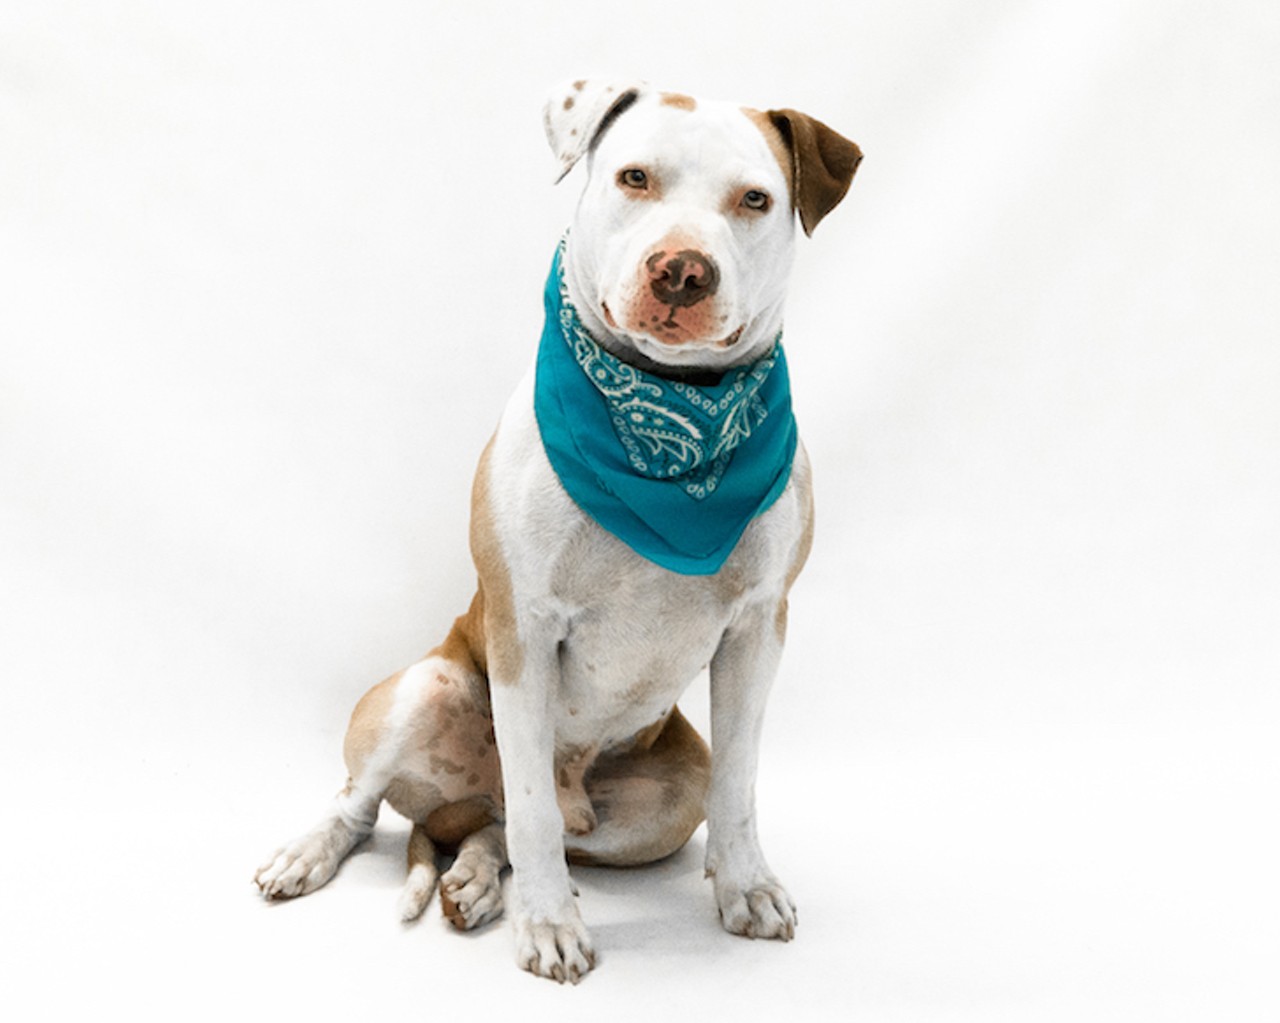 17 adoptable dogs available right now at Orange County Animal Services